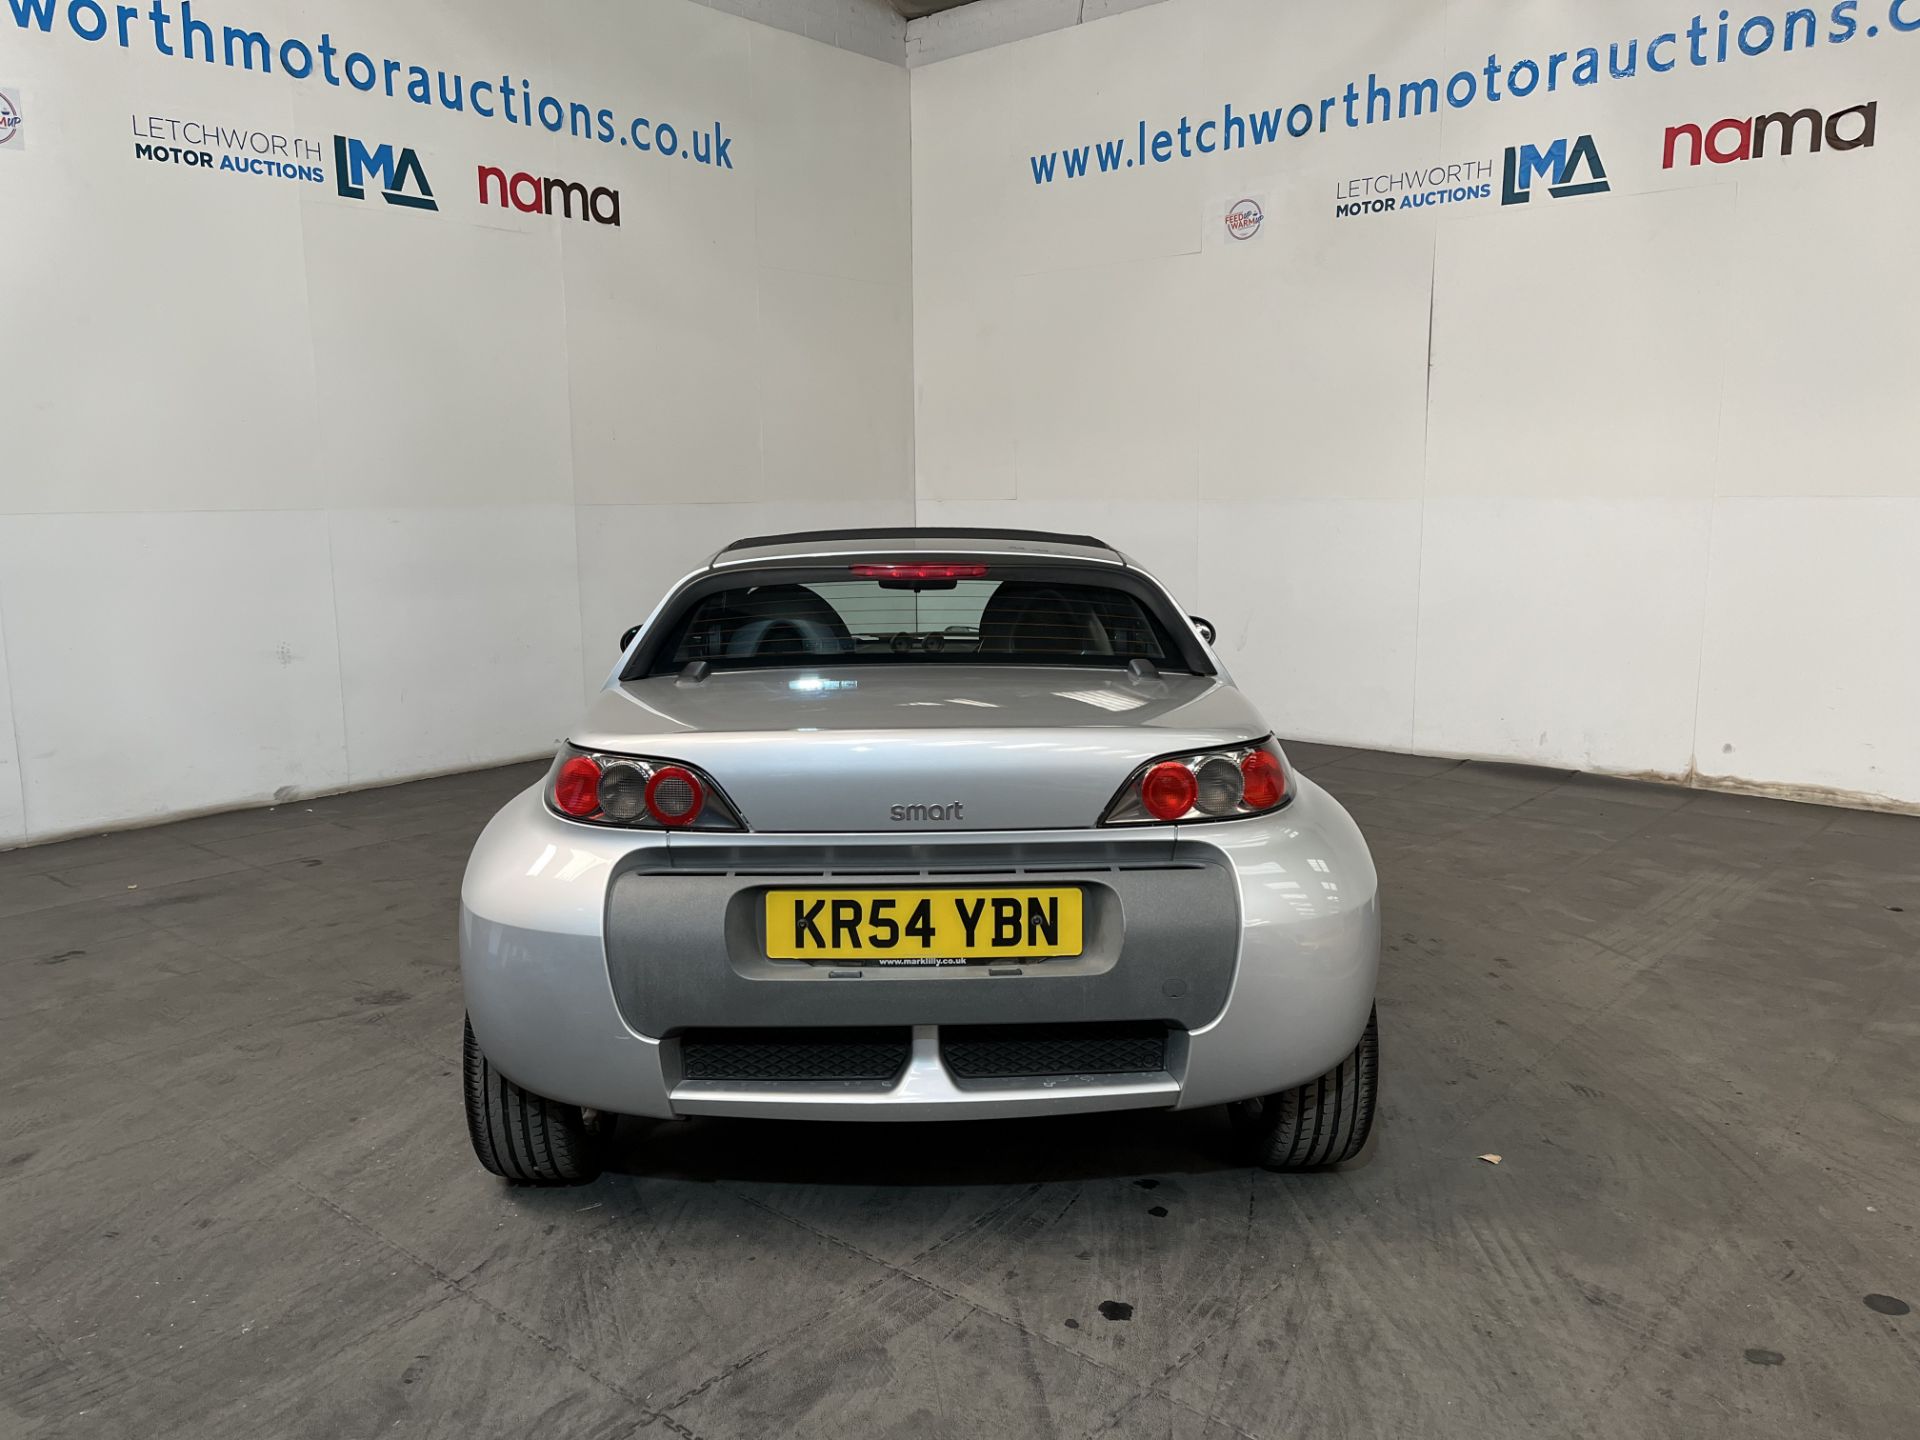 2004 Smart Roadster Speedsilver Auto - 698cc - Image 9 of 22